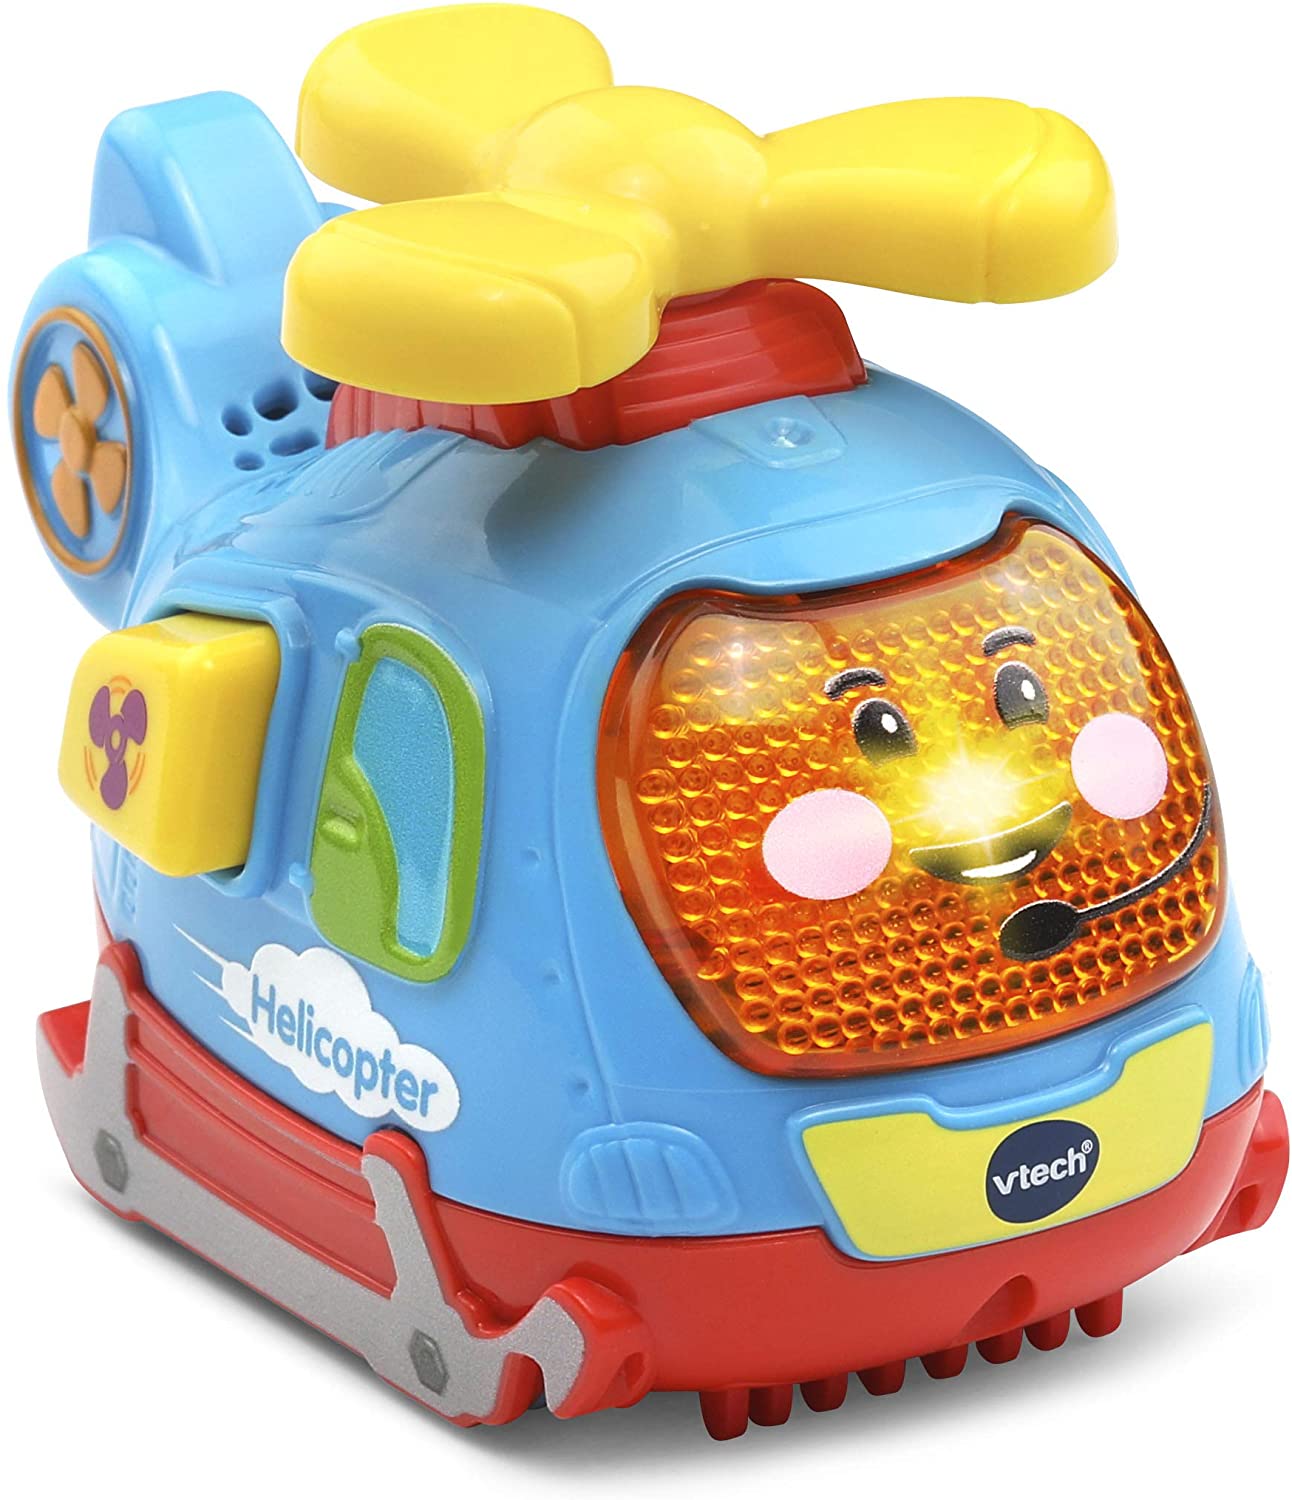 Vtech Toot Toot Helicopter (80-516803)